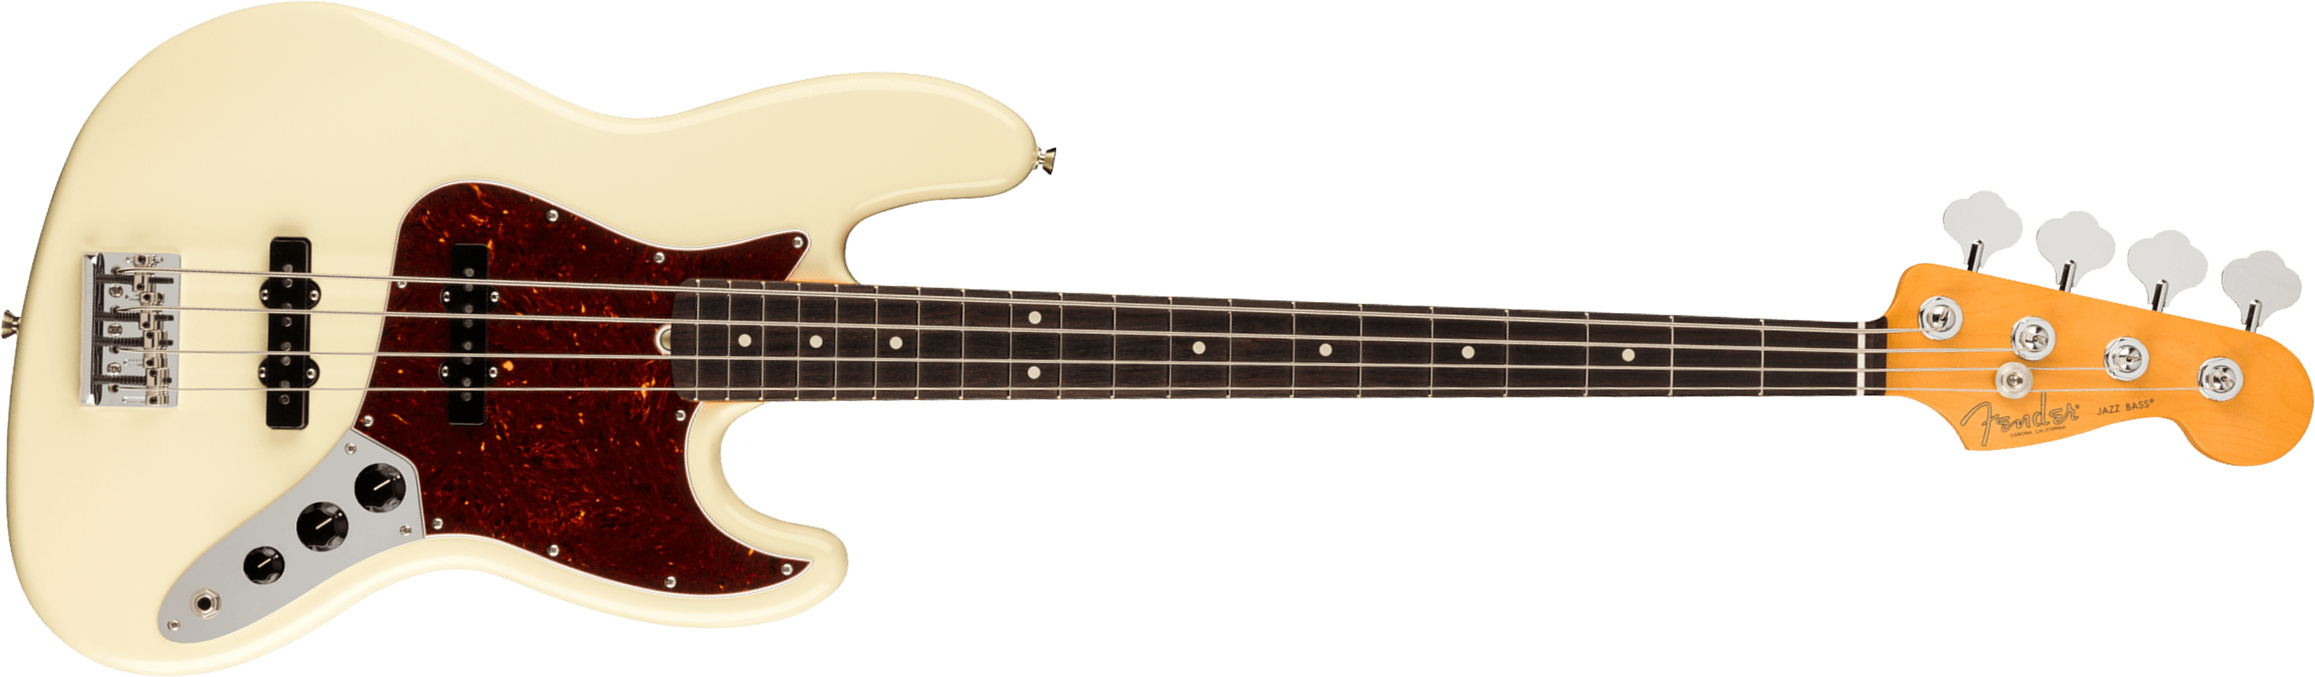 Fender Jazz Bass American Professional Ii Usa Rw - Olympic White - Solid body elektrische bas - Main picture